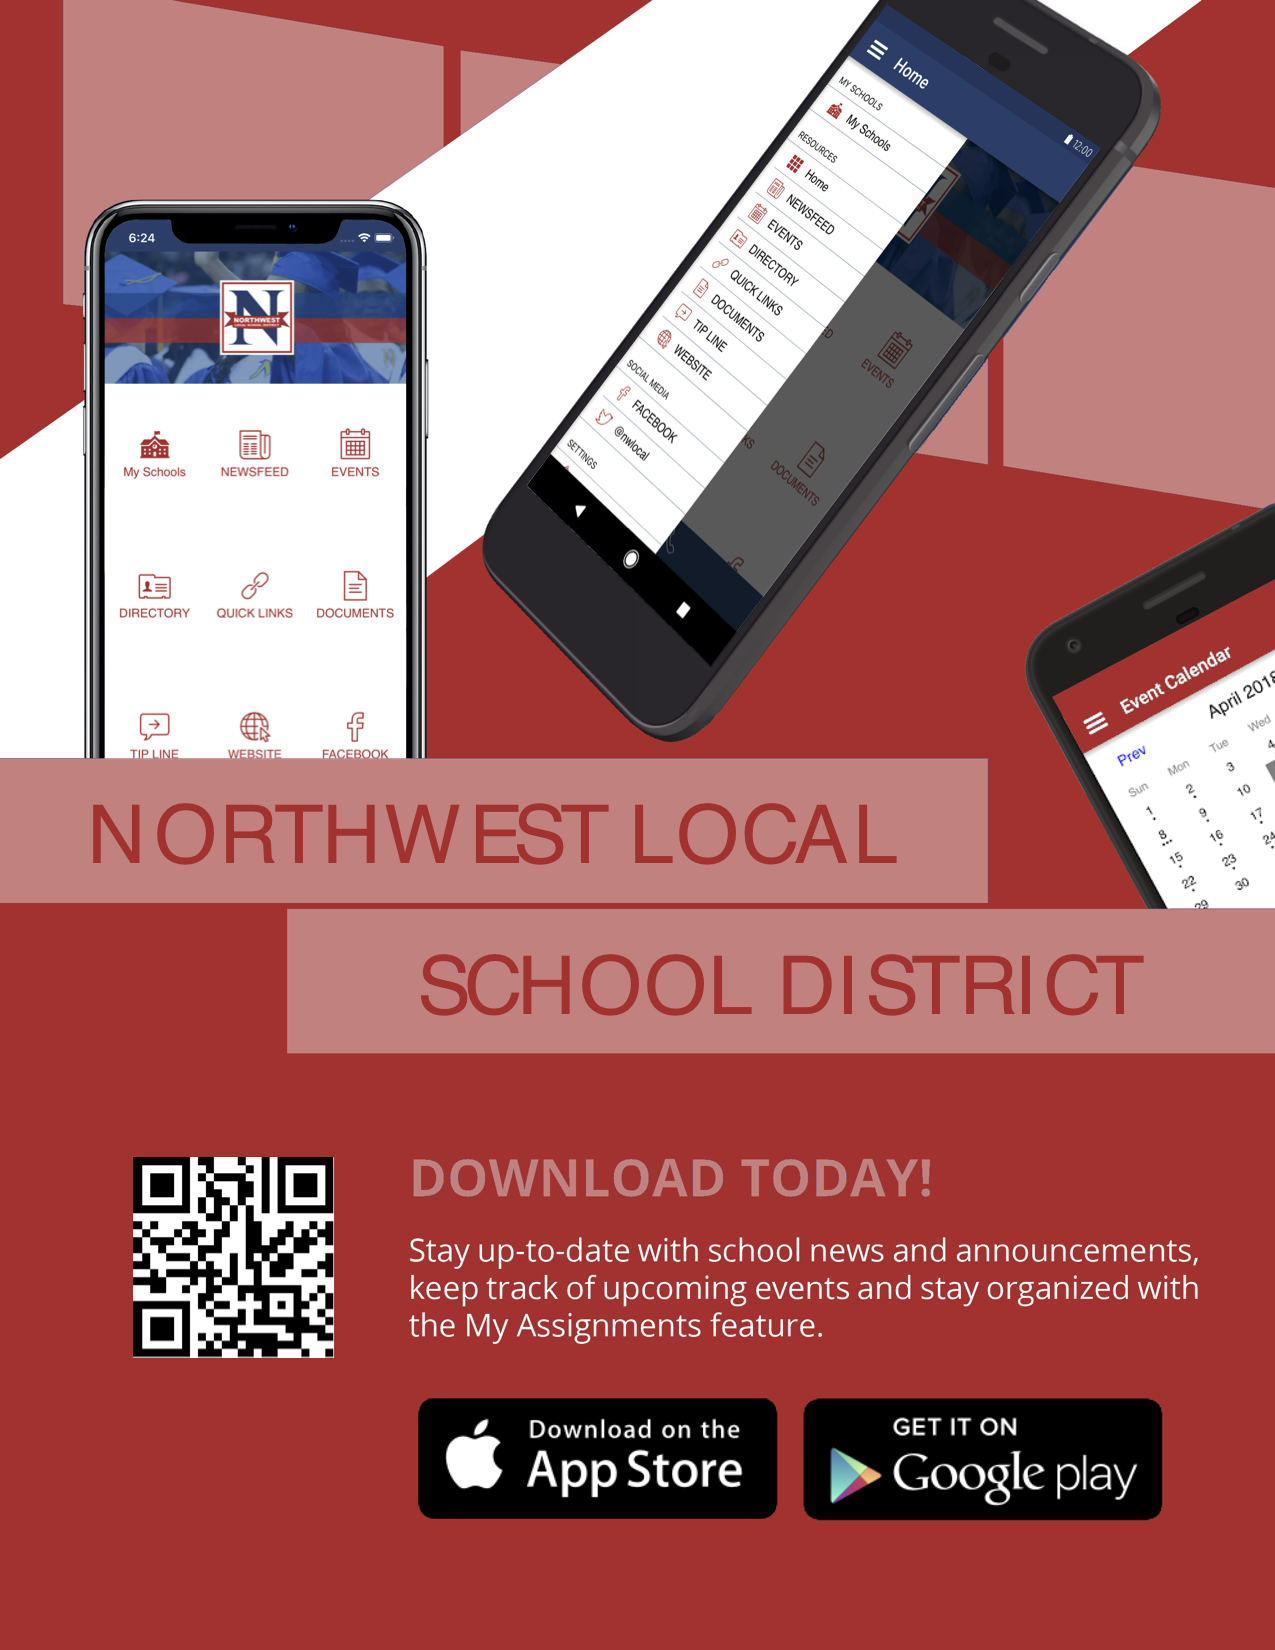 Northwest Local School District, download today, Stay up-to-date with school news and announcements, keep track of upcoming events and stay organized with the My Assignments feature.    